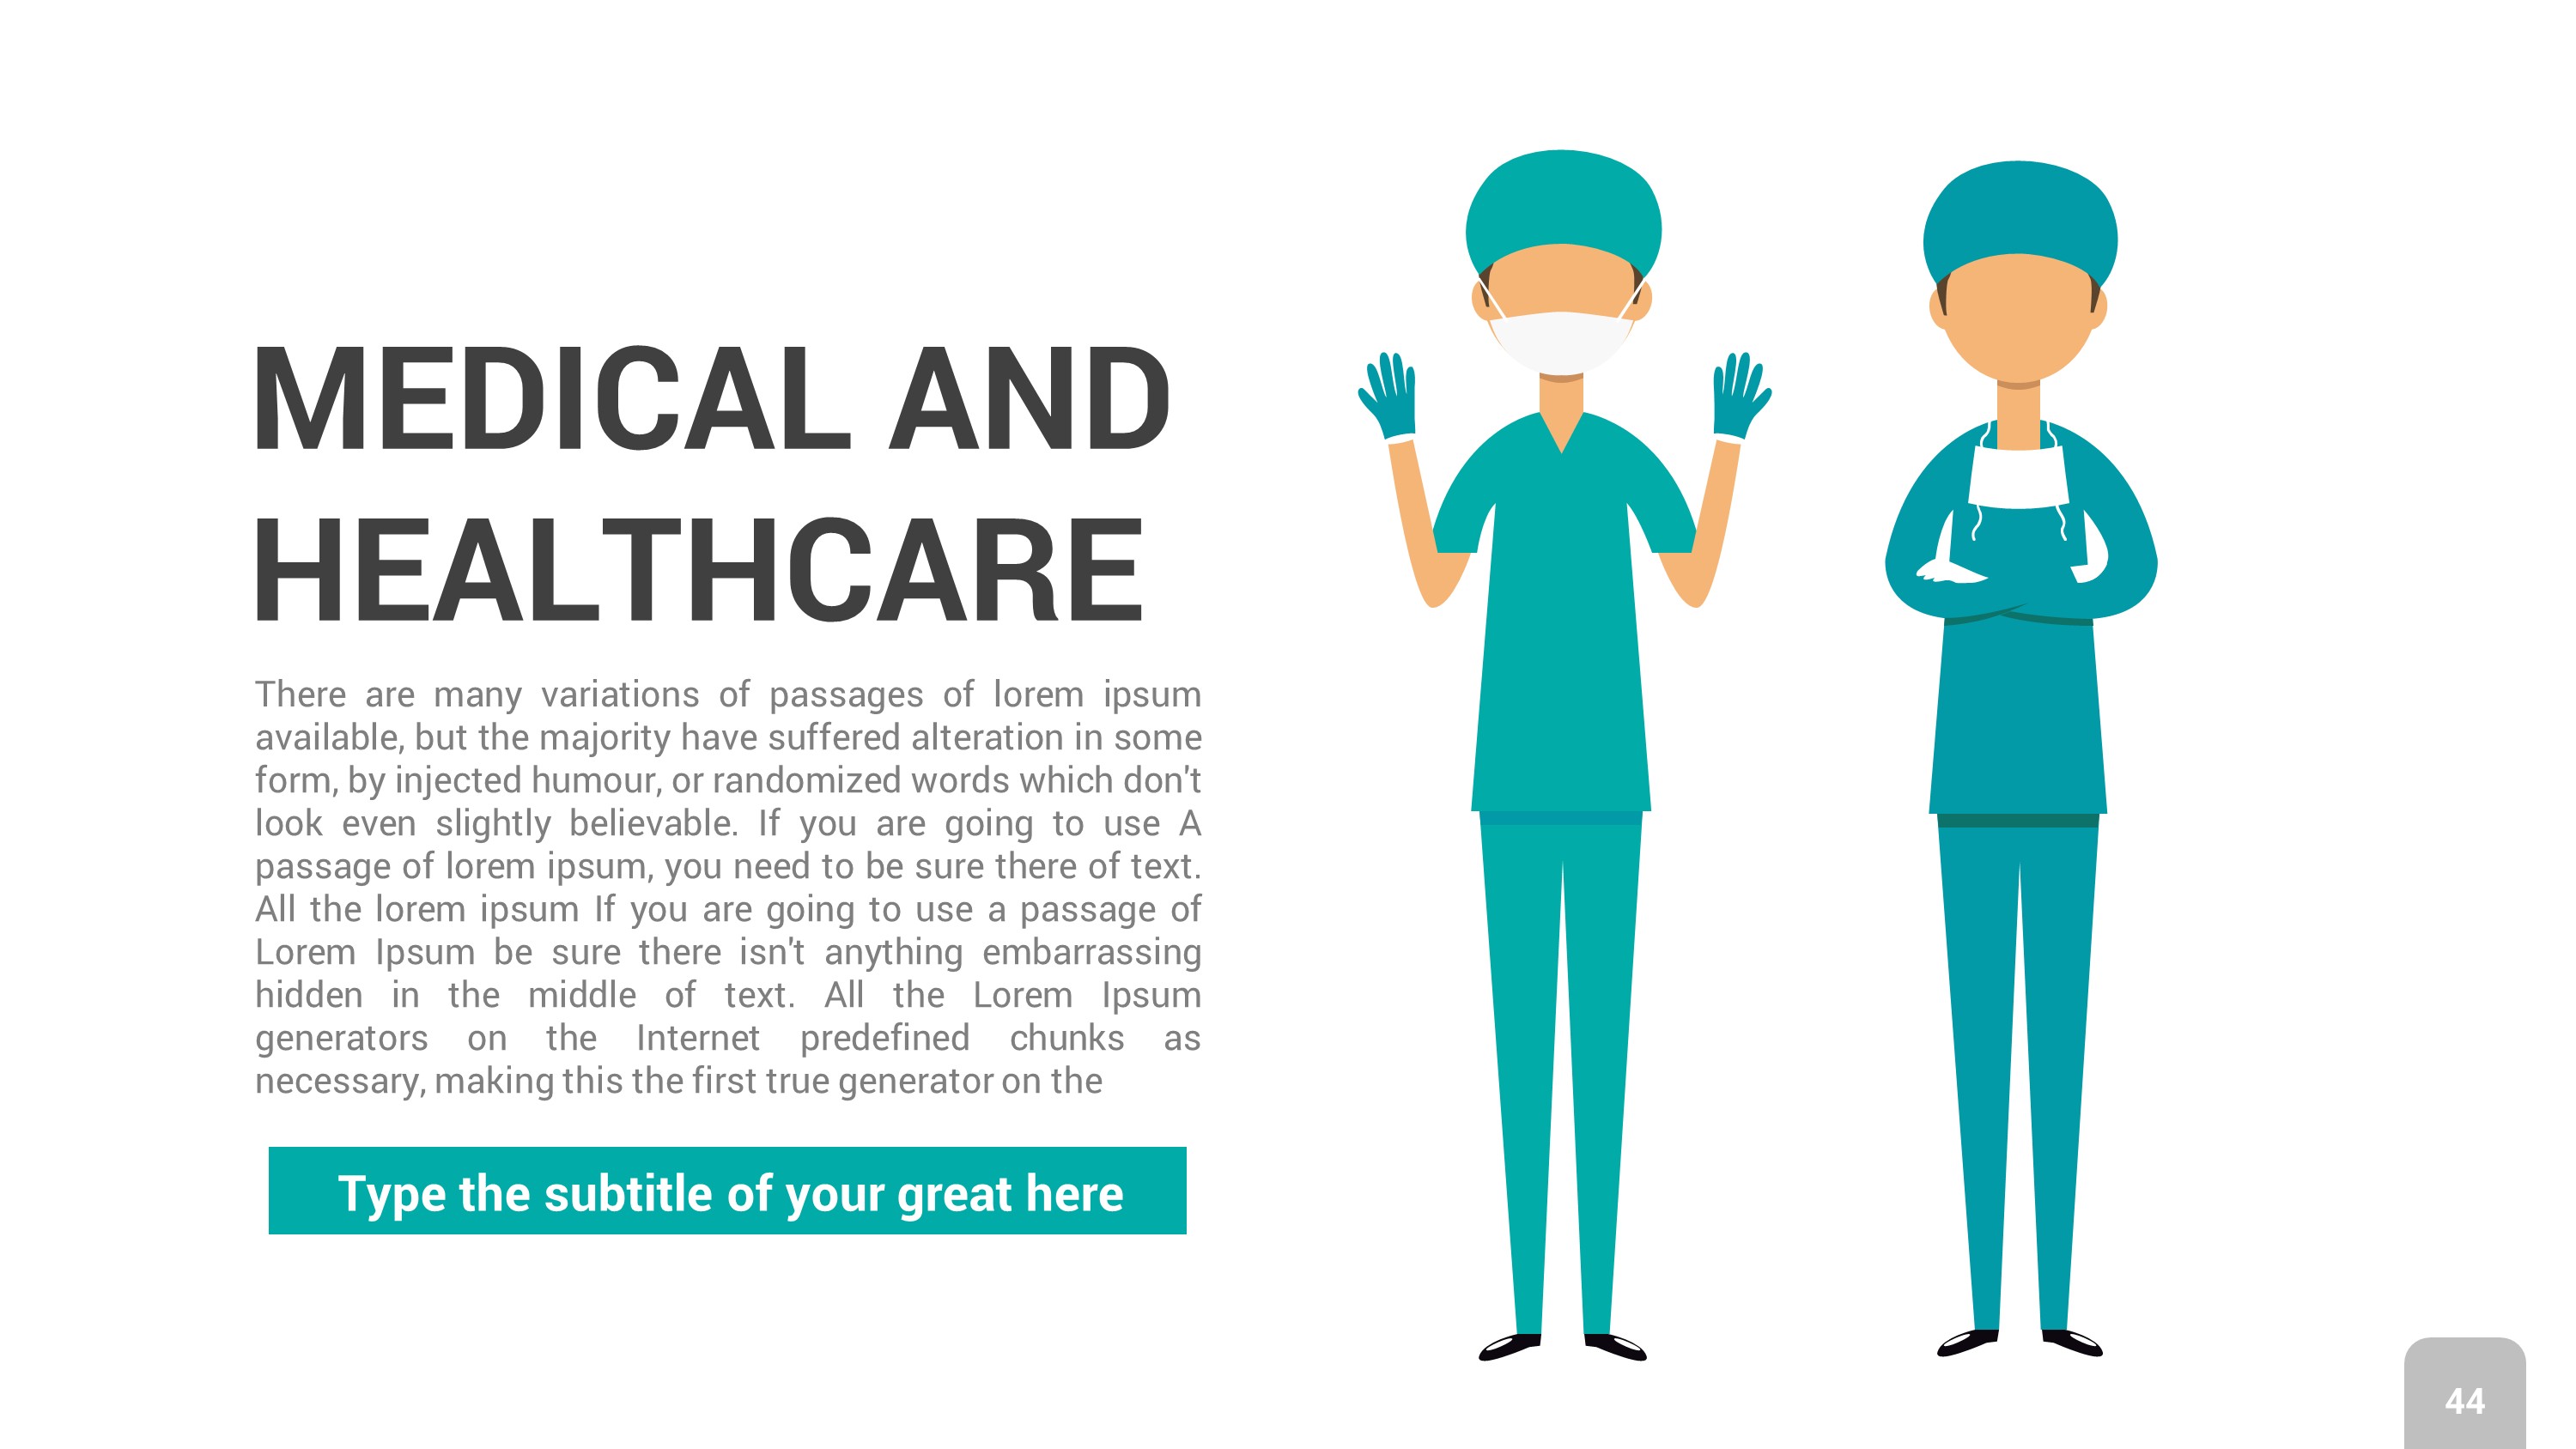 Medical PowerPoint Presentation Template